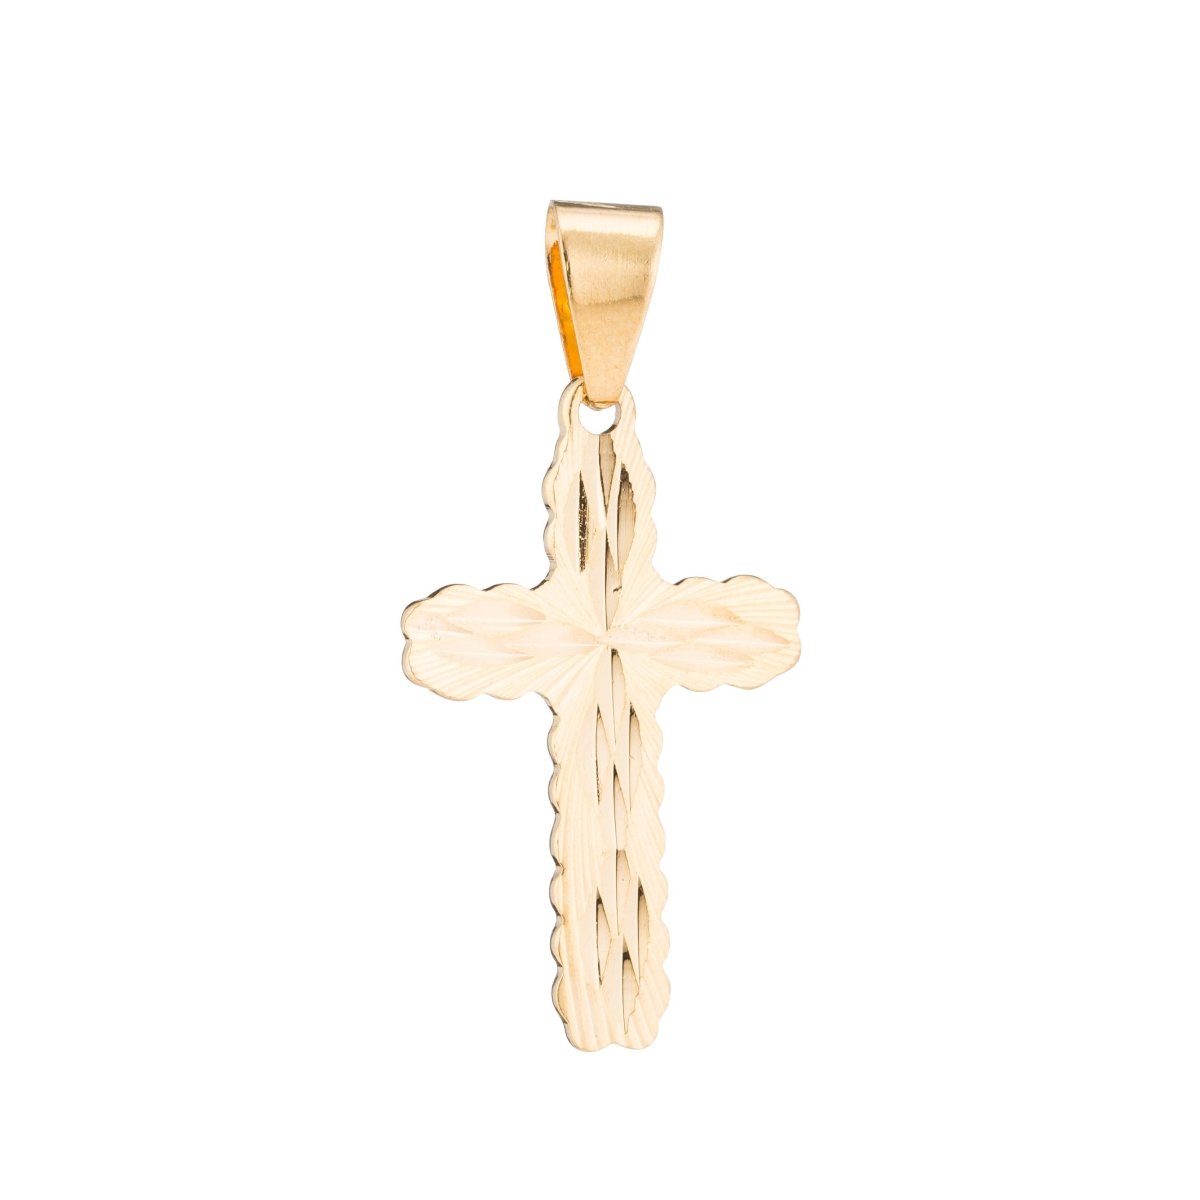 Gold Cross, Jesus, Faith, Hope, Love, Joy, Peace, Believe, Family, Church, Necklace Pendant Charm Bead Bails Findings for Jewelry Making H-189 - DLUXCA